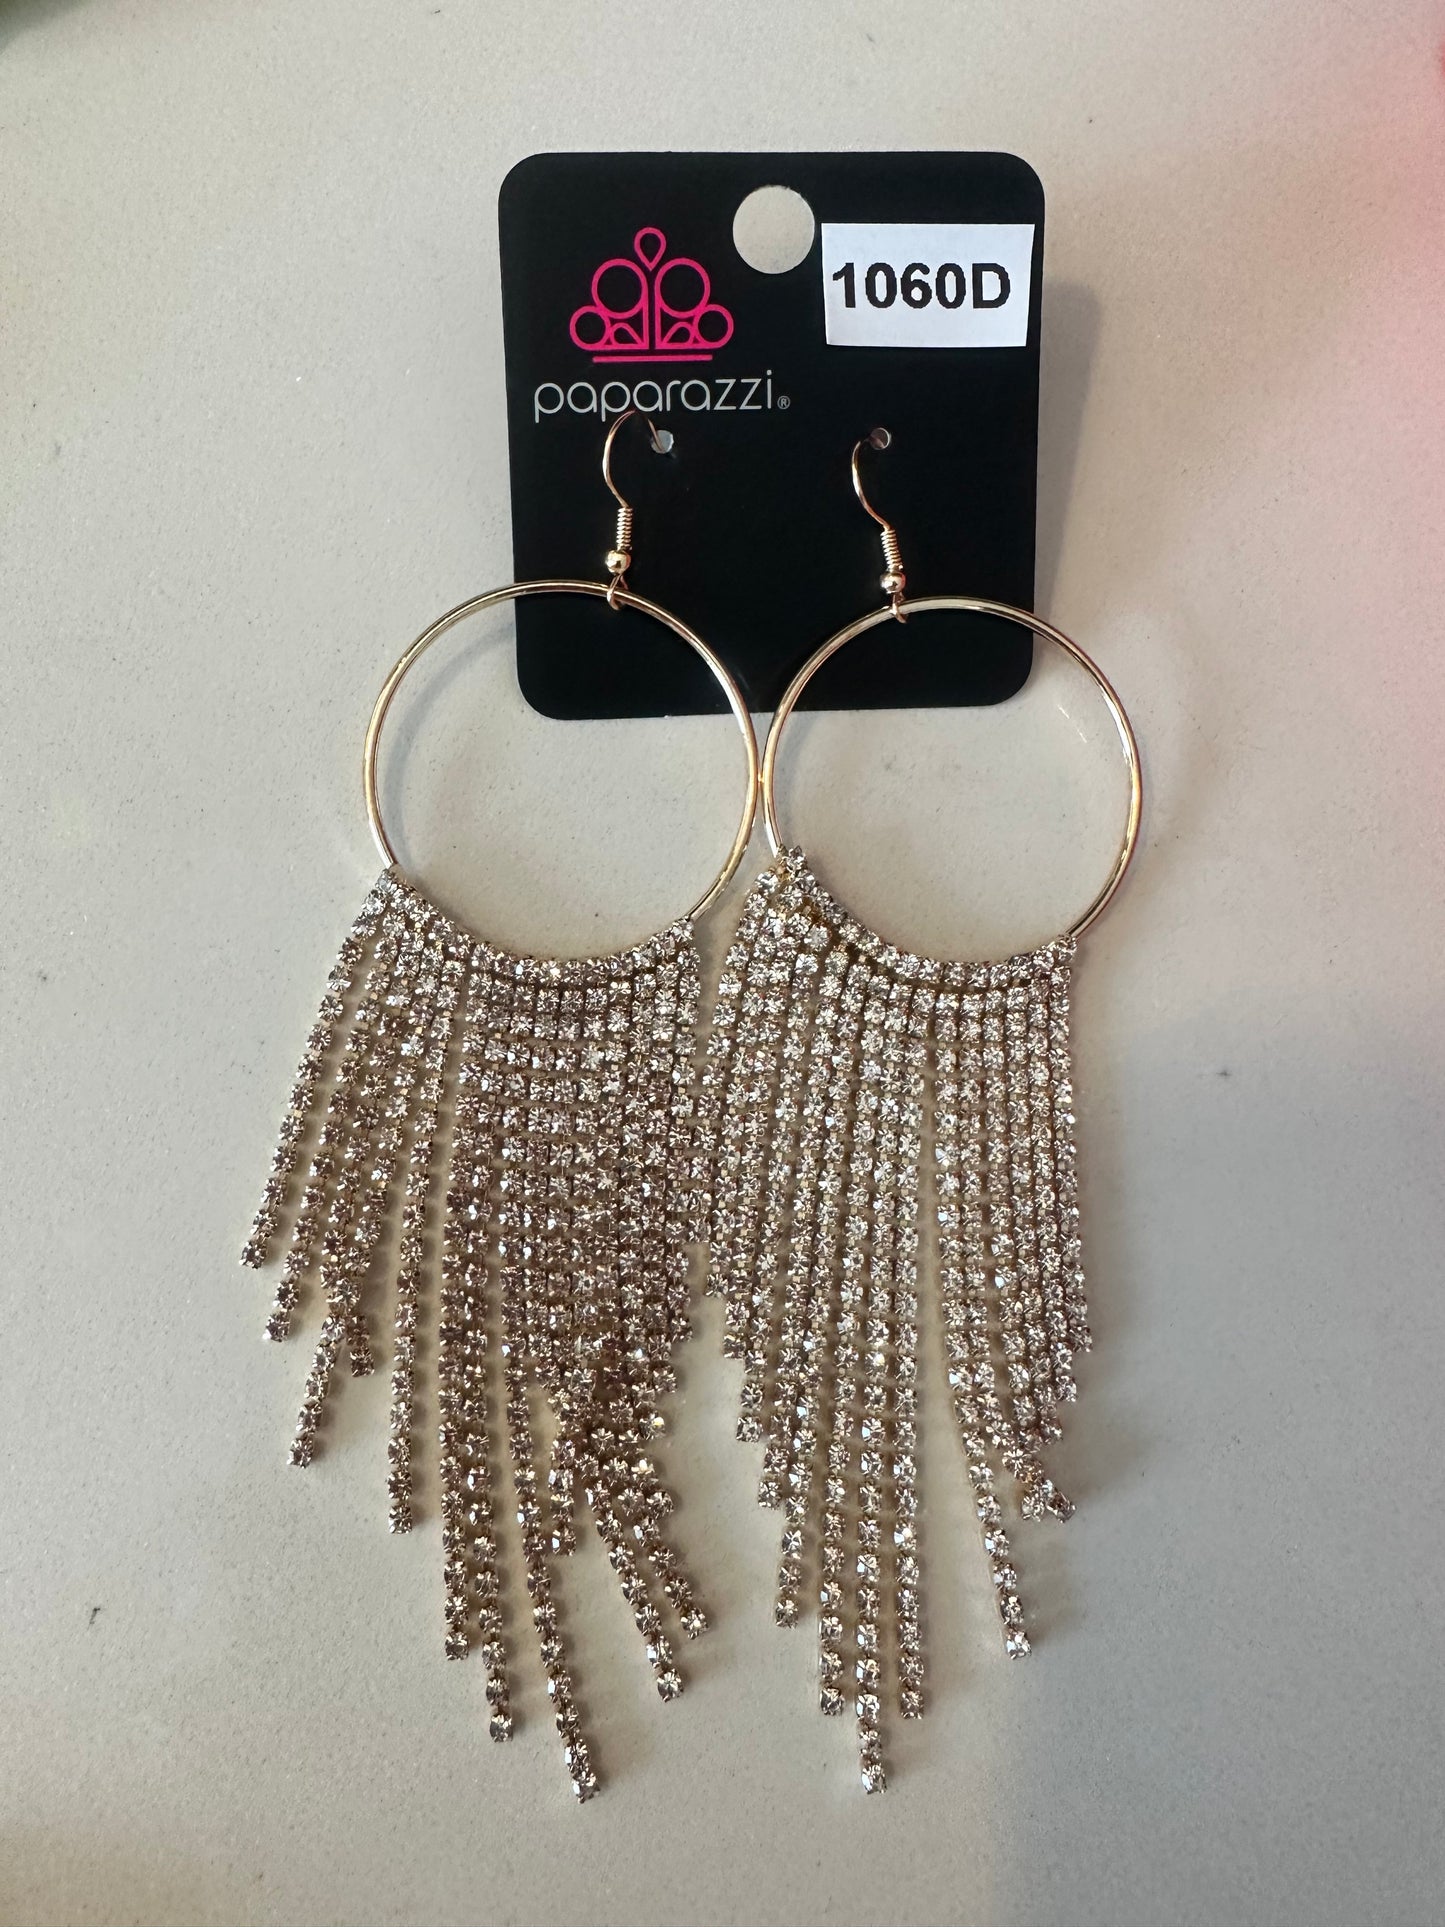 Paparazzi Streamlined Shimmer Gold Earrings - Life of the Party Pink Diamond Exclusive